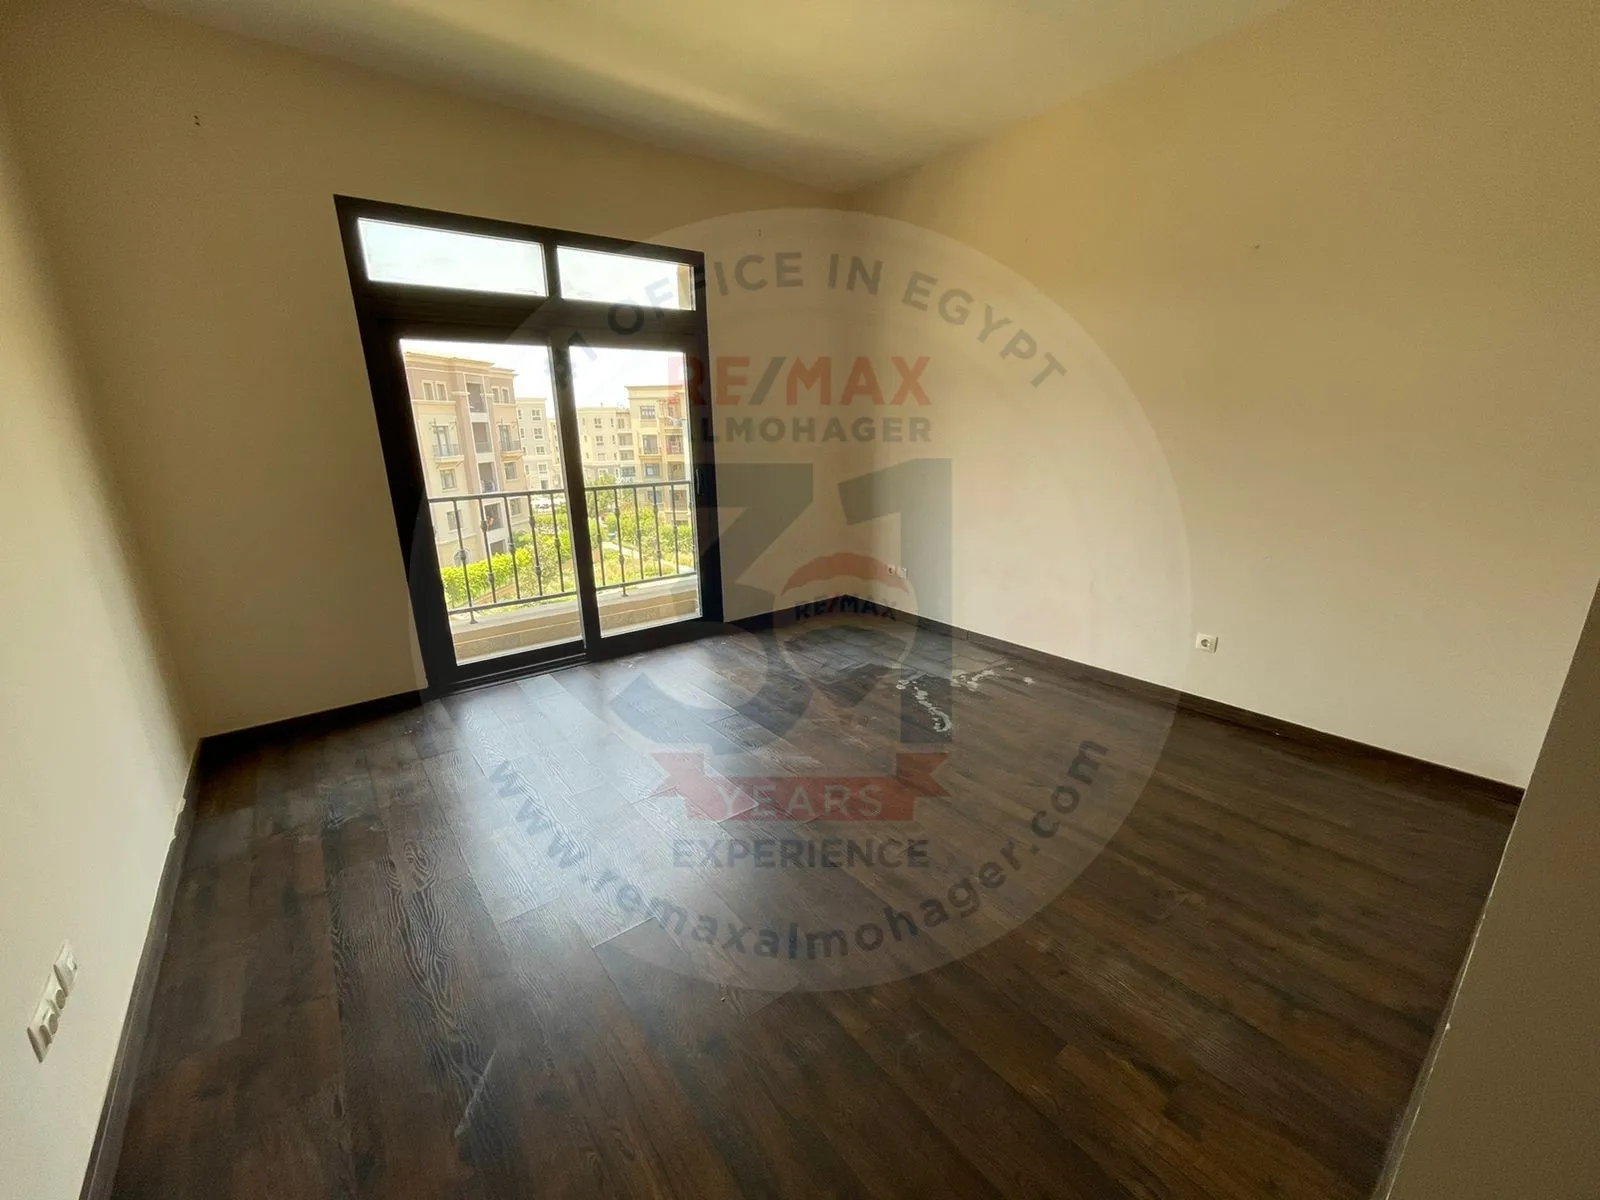 3 bedrooms apartment for rent with kitchen